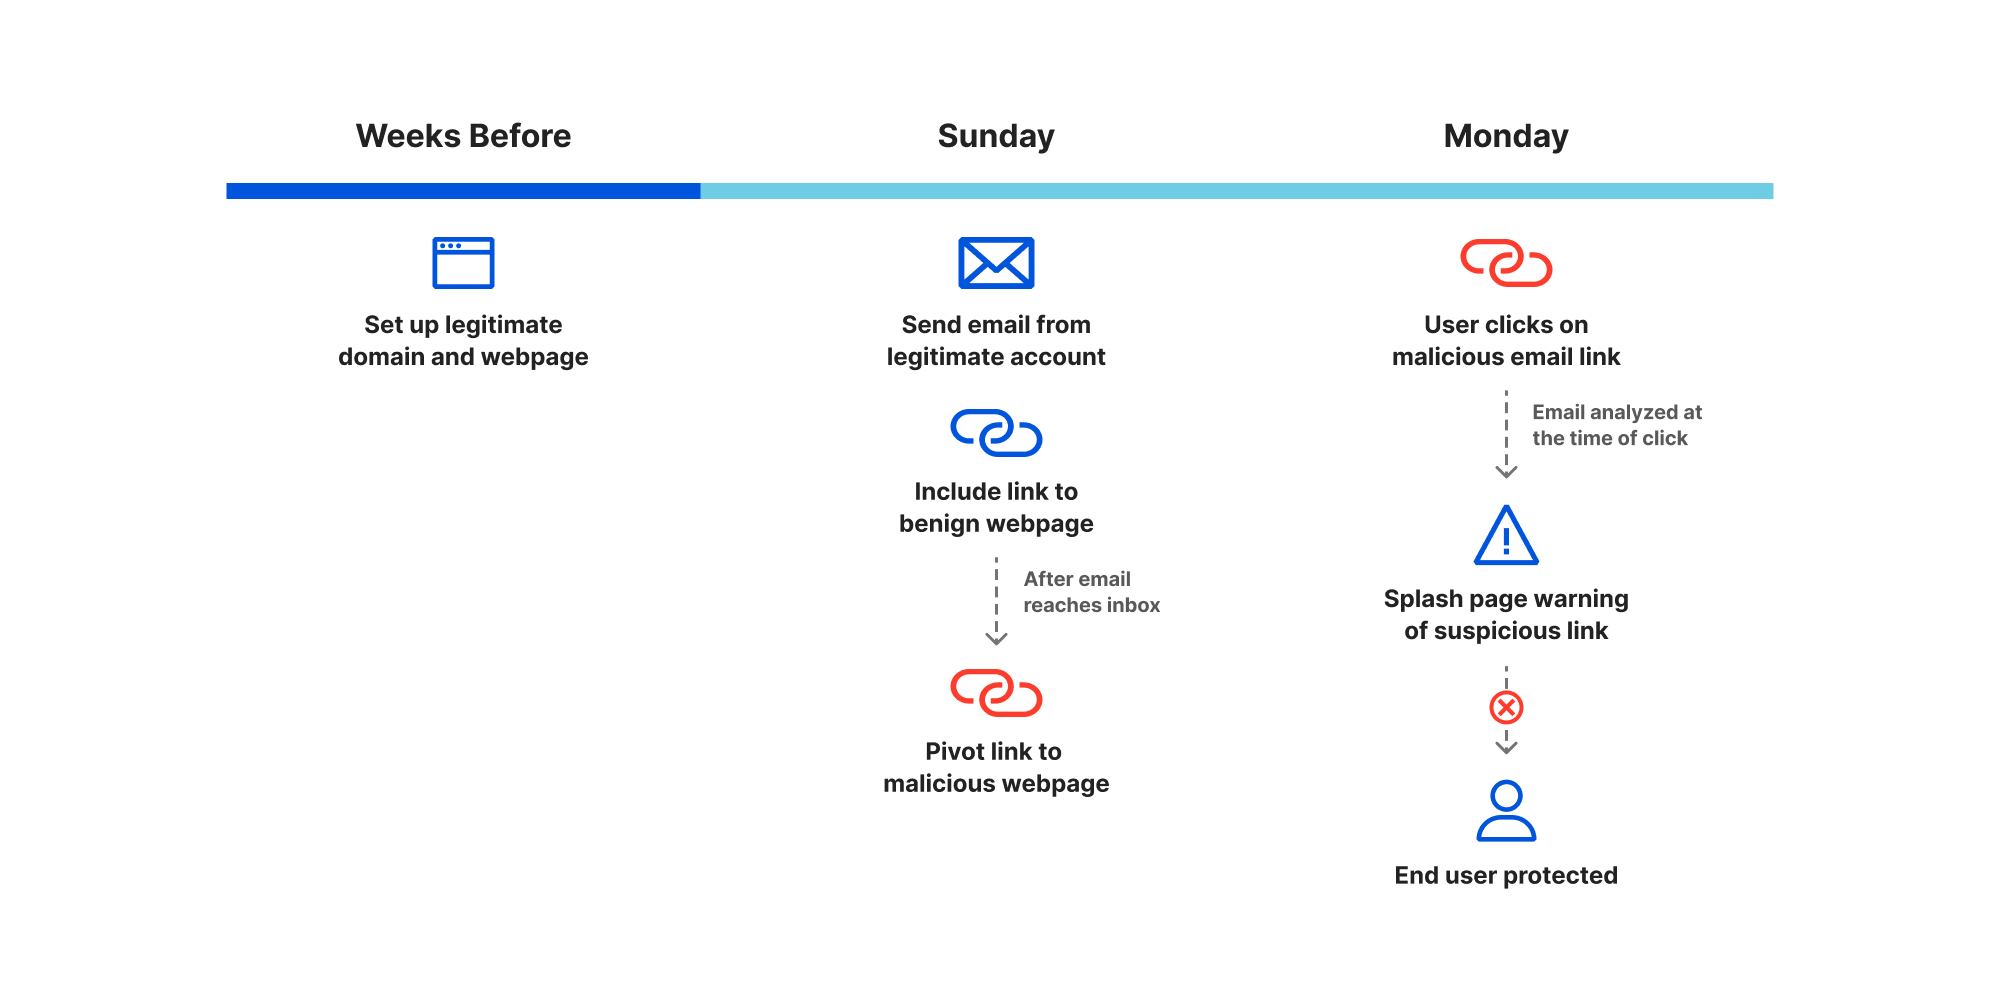 Timeline of events, where a legitimate webpage is initially set up and linked to. A few days later, once the email has been identified as benign and delivered to the end users, the webpage is then weaponized.